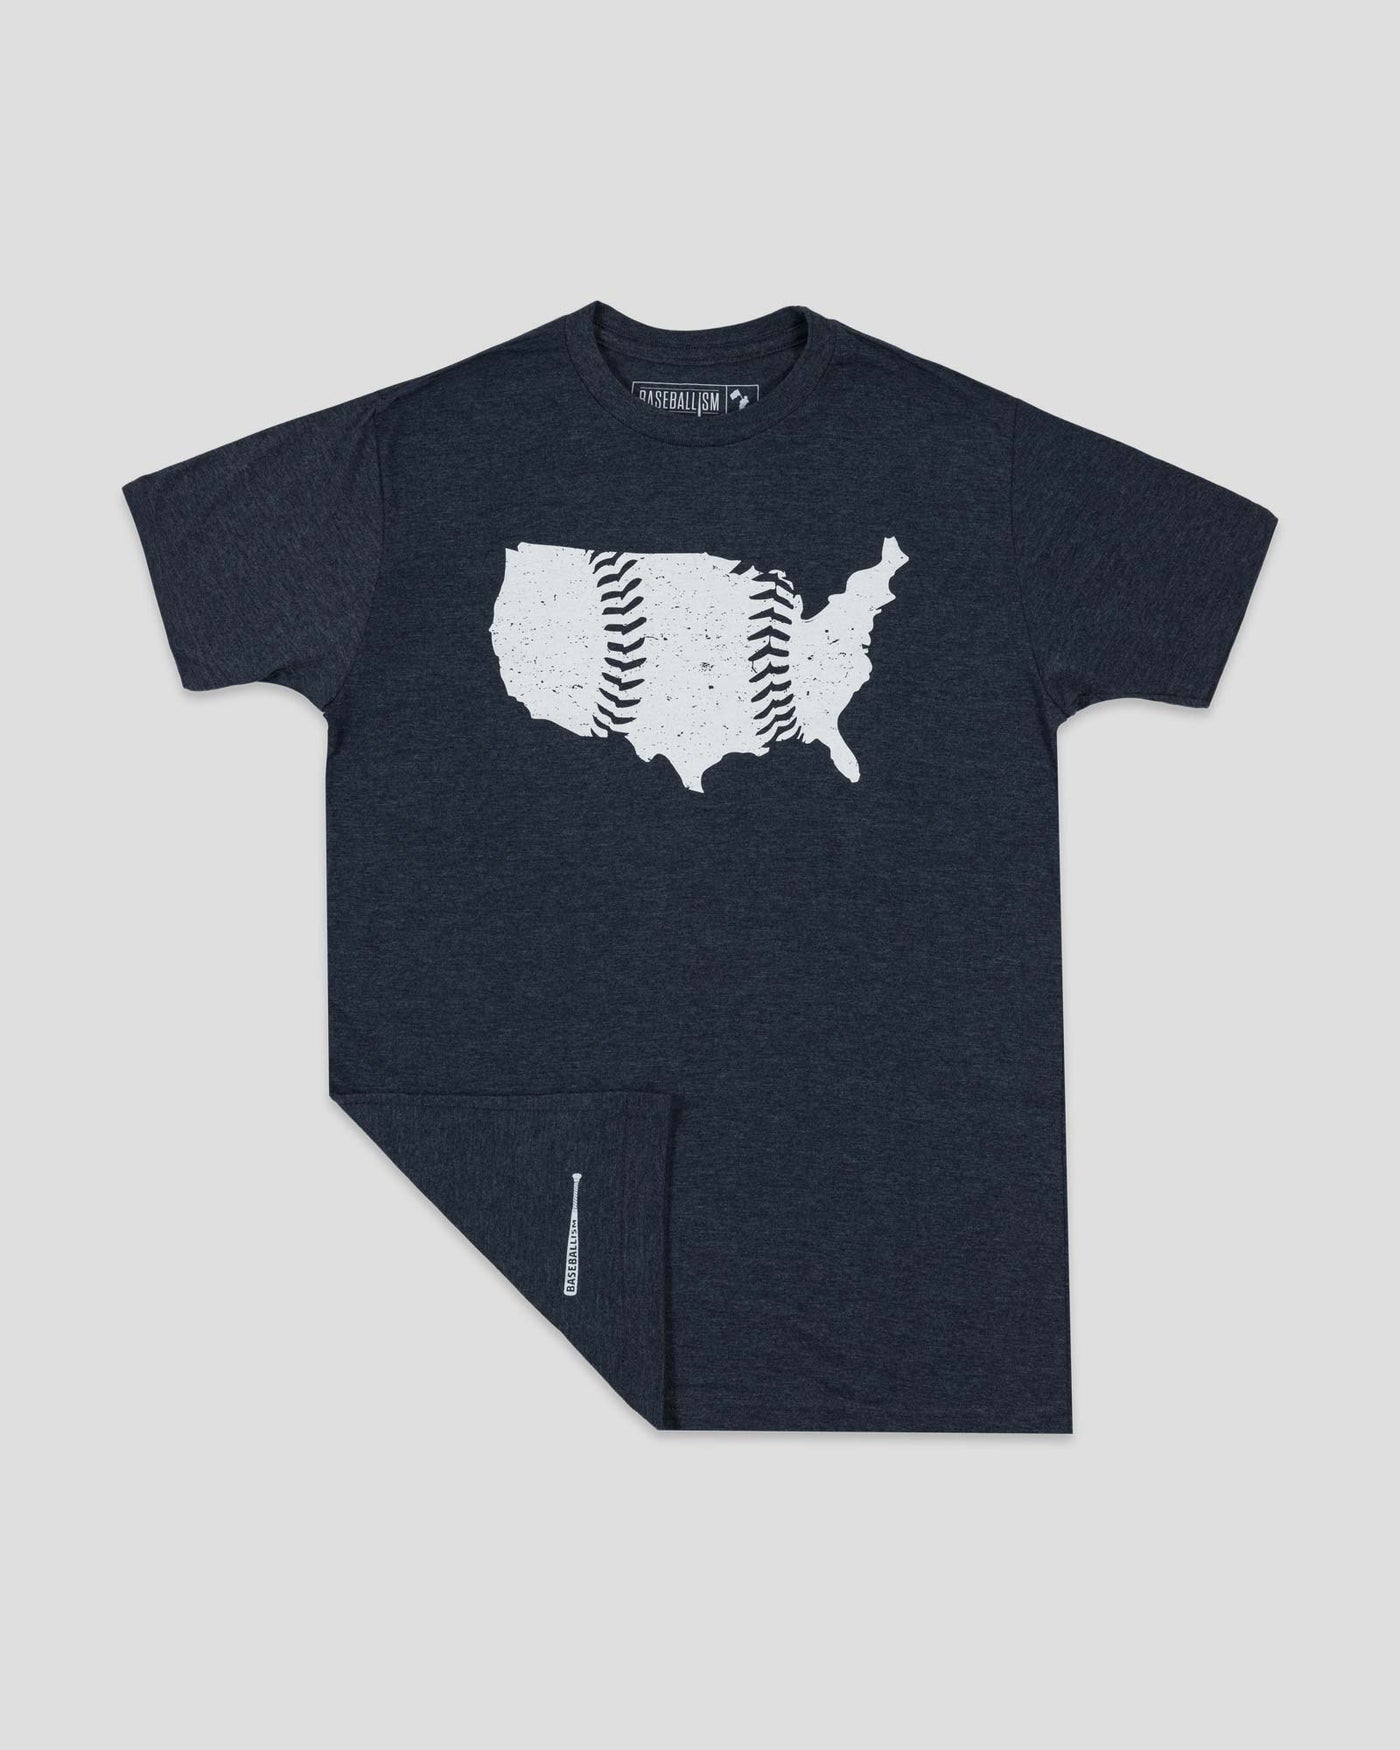 United Seams - Navy and White